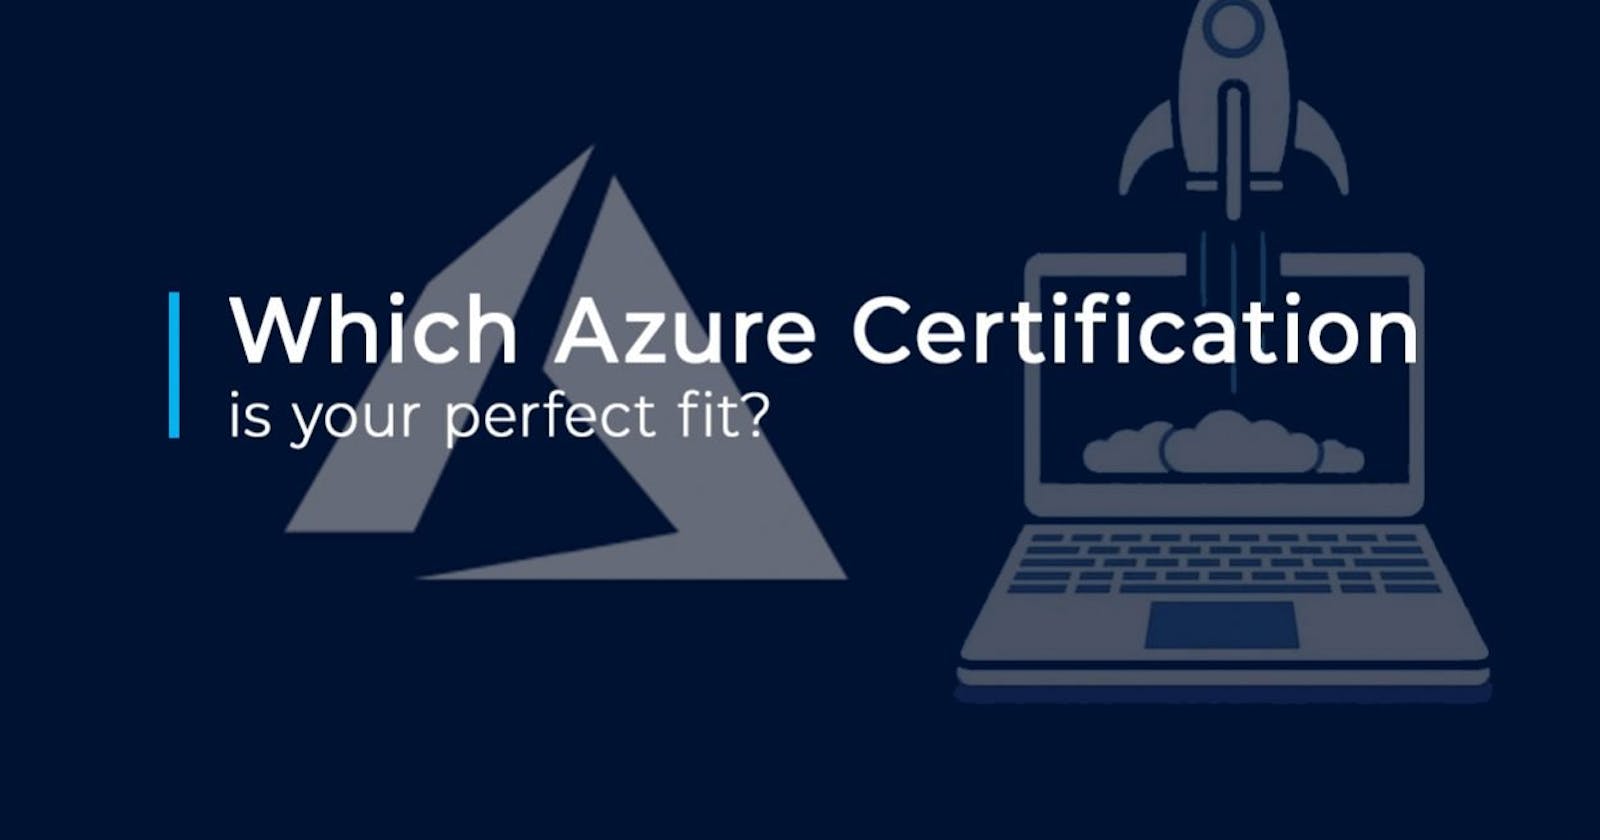 Which Azure Certification is Your perfect fit?